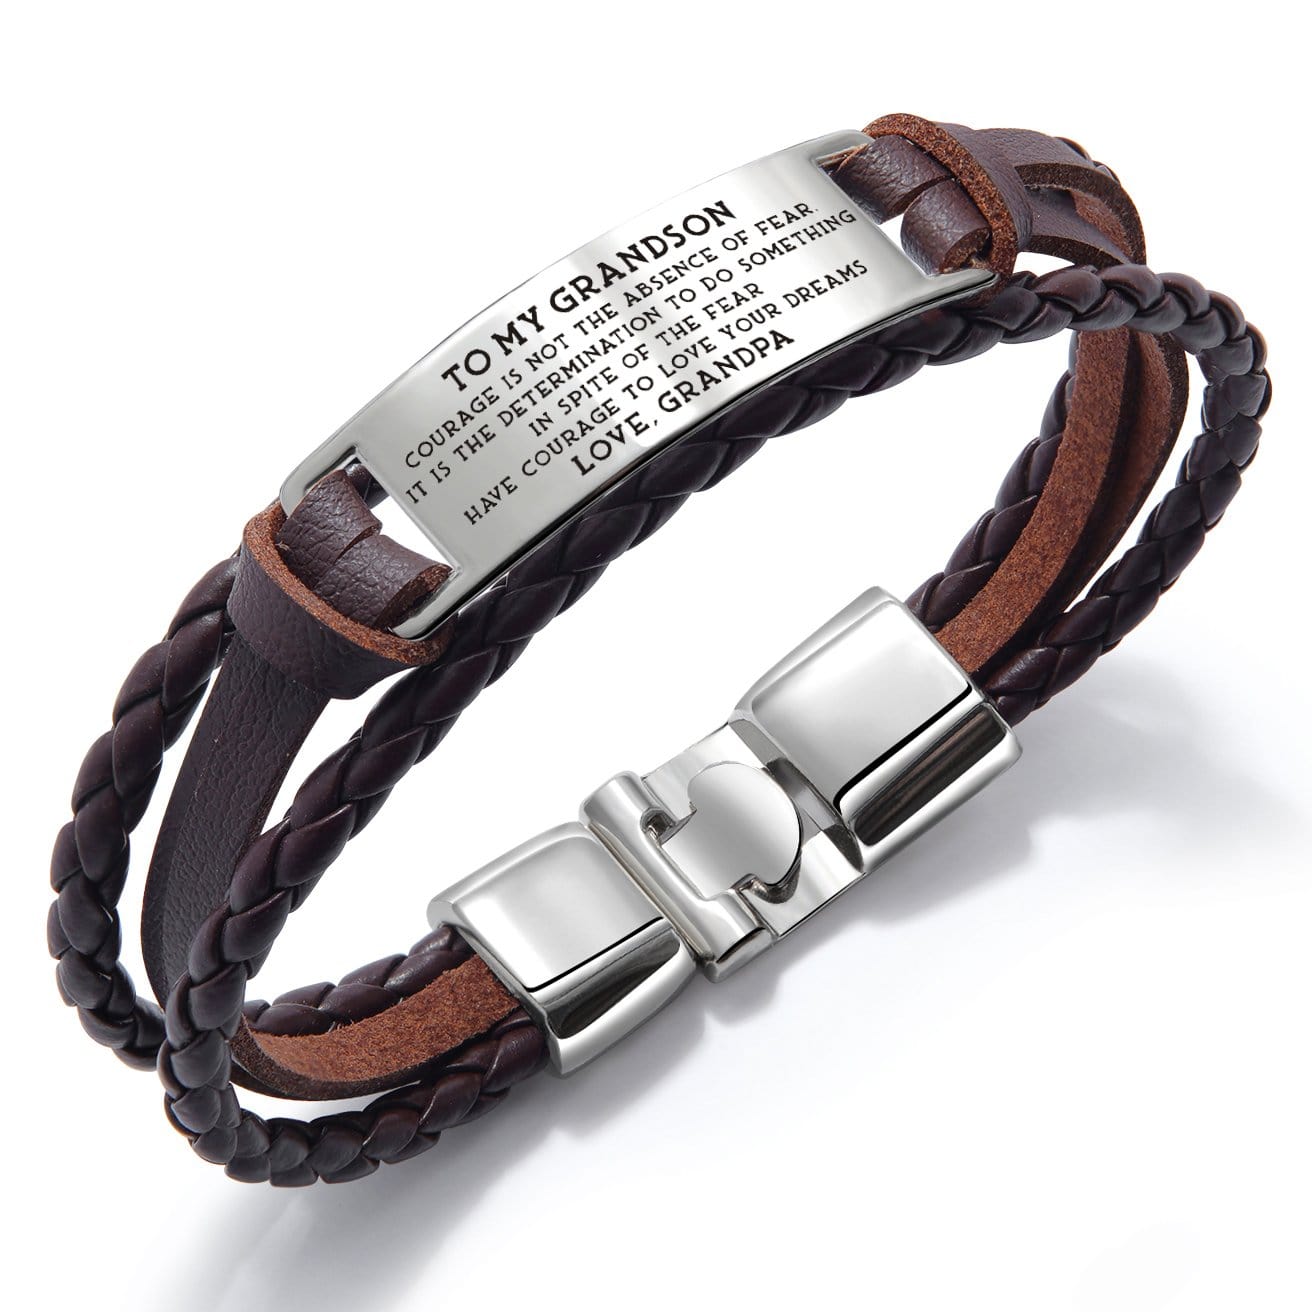 Bracelets Grandpa To Grandson - To Love Your Dreams Leather Bracelet Brown GiveMe-Gifts